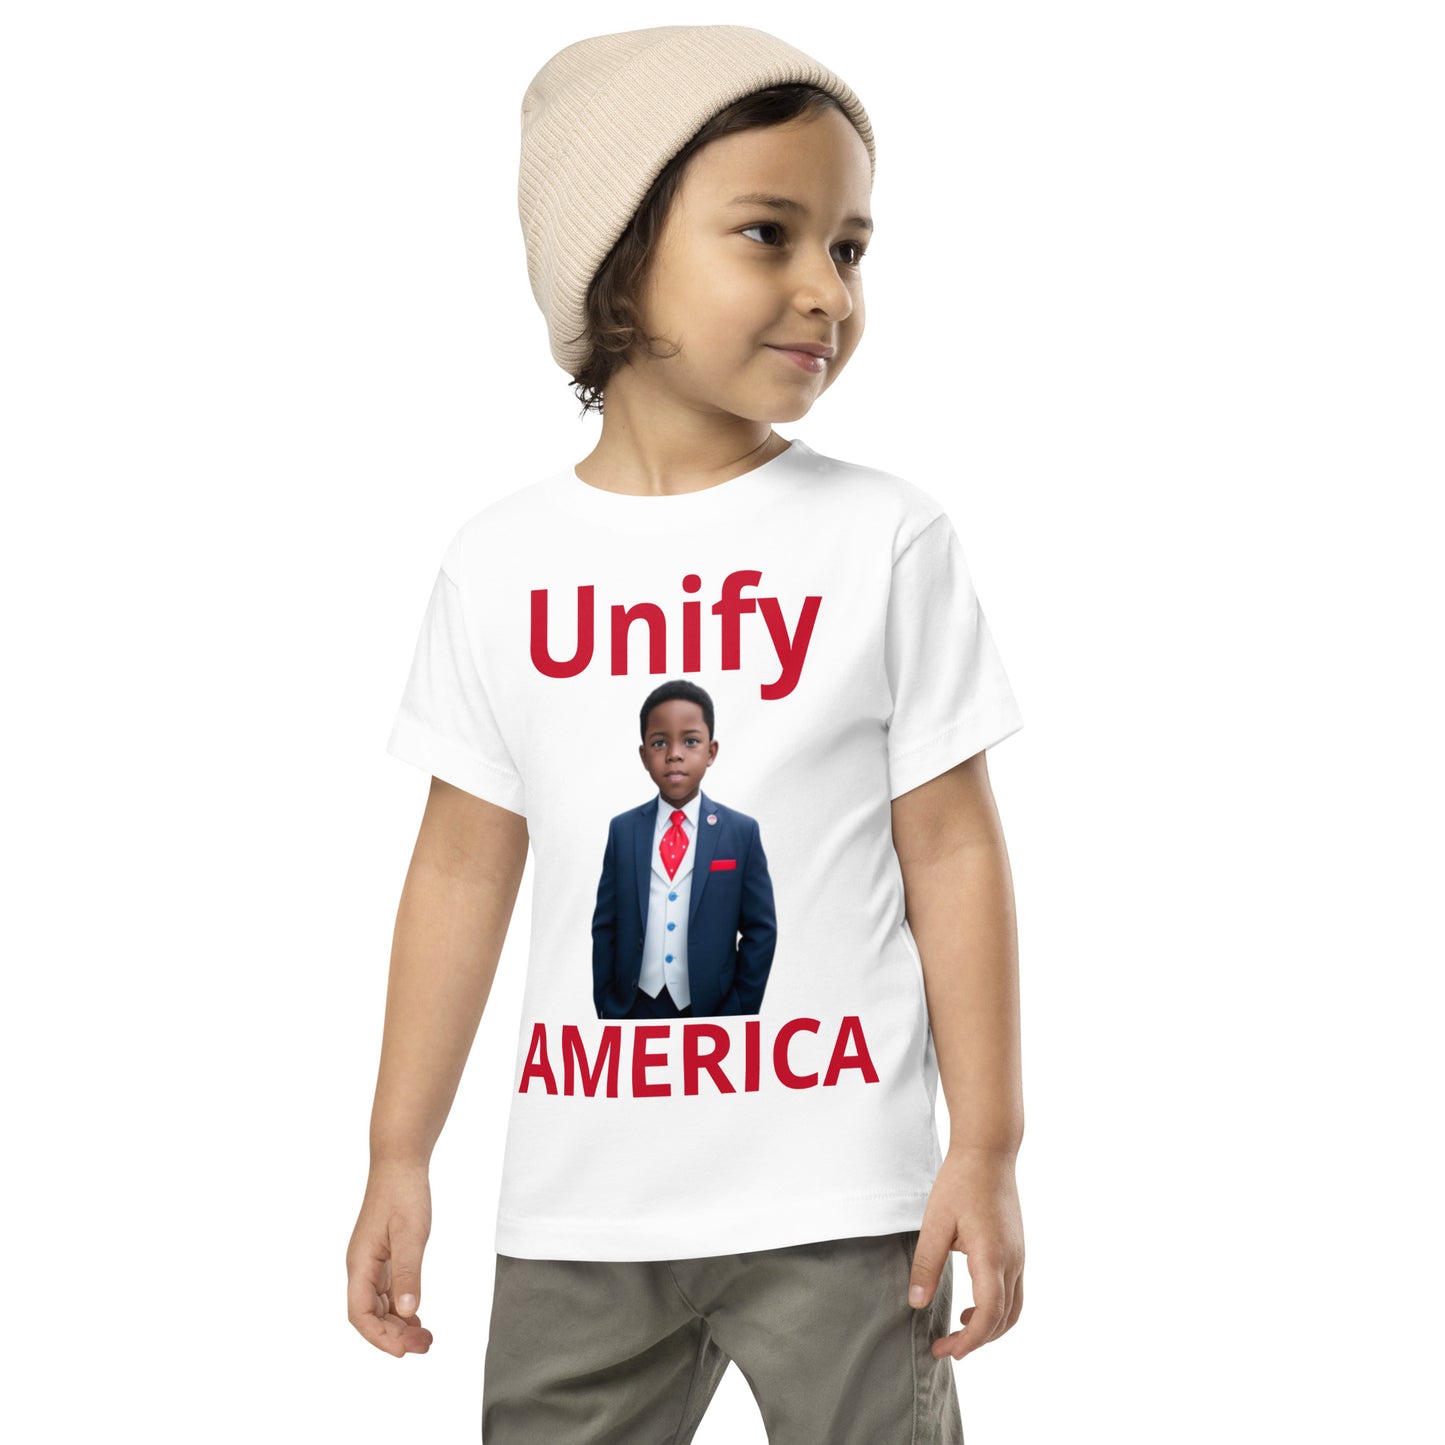 Unify America Brown Toddler Unisex Tee